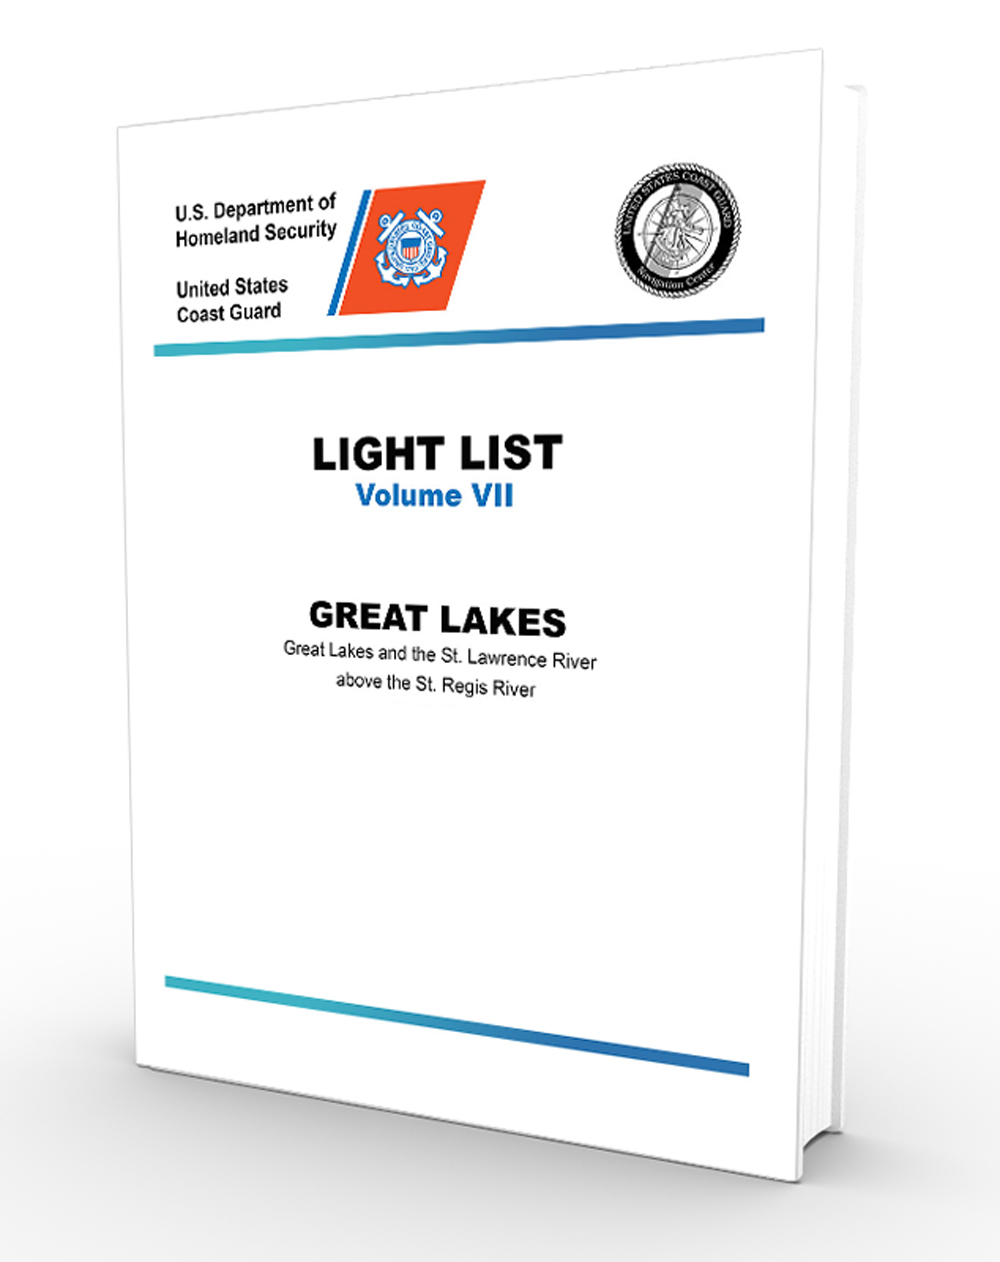 USCG Light Lists, USCG Light List VII 2022: Great Lakes Great Lakes and the St. Lawrence River above the St. Regis River